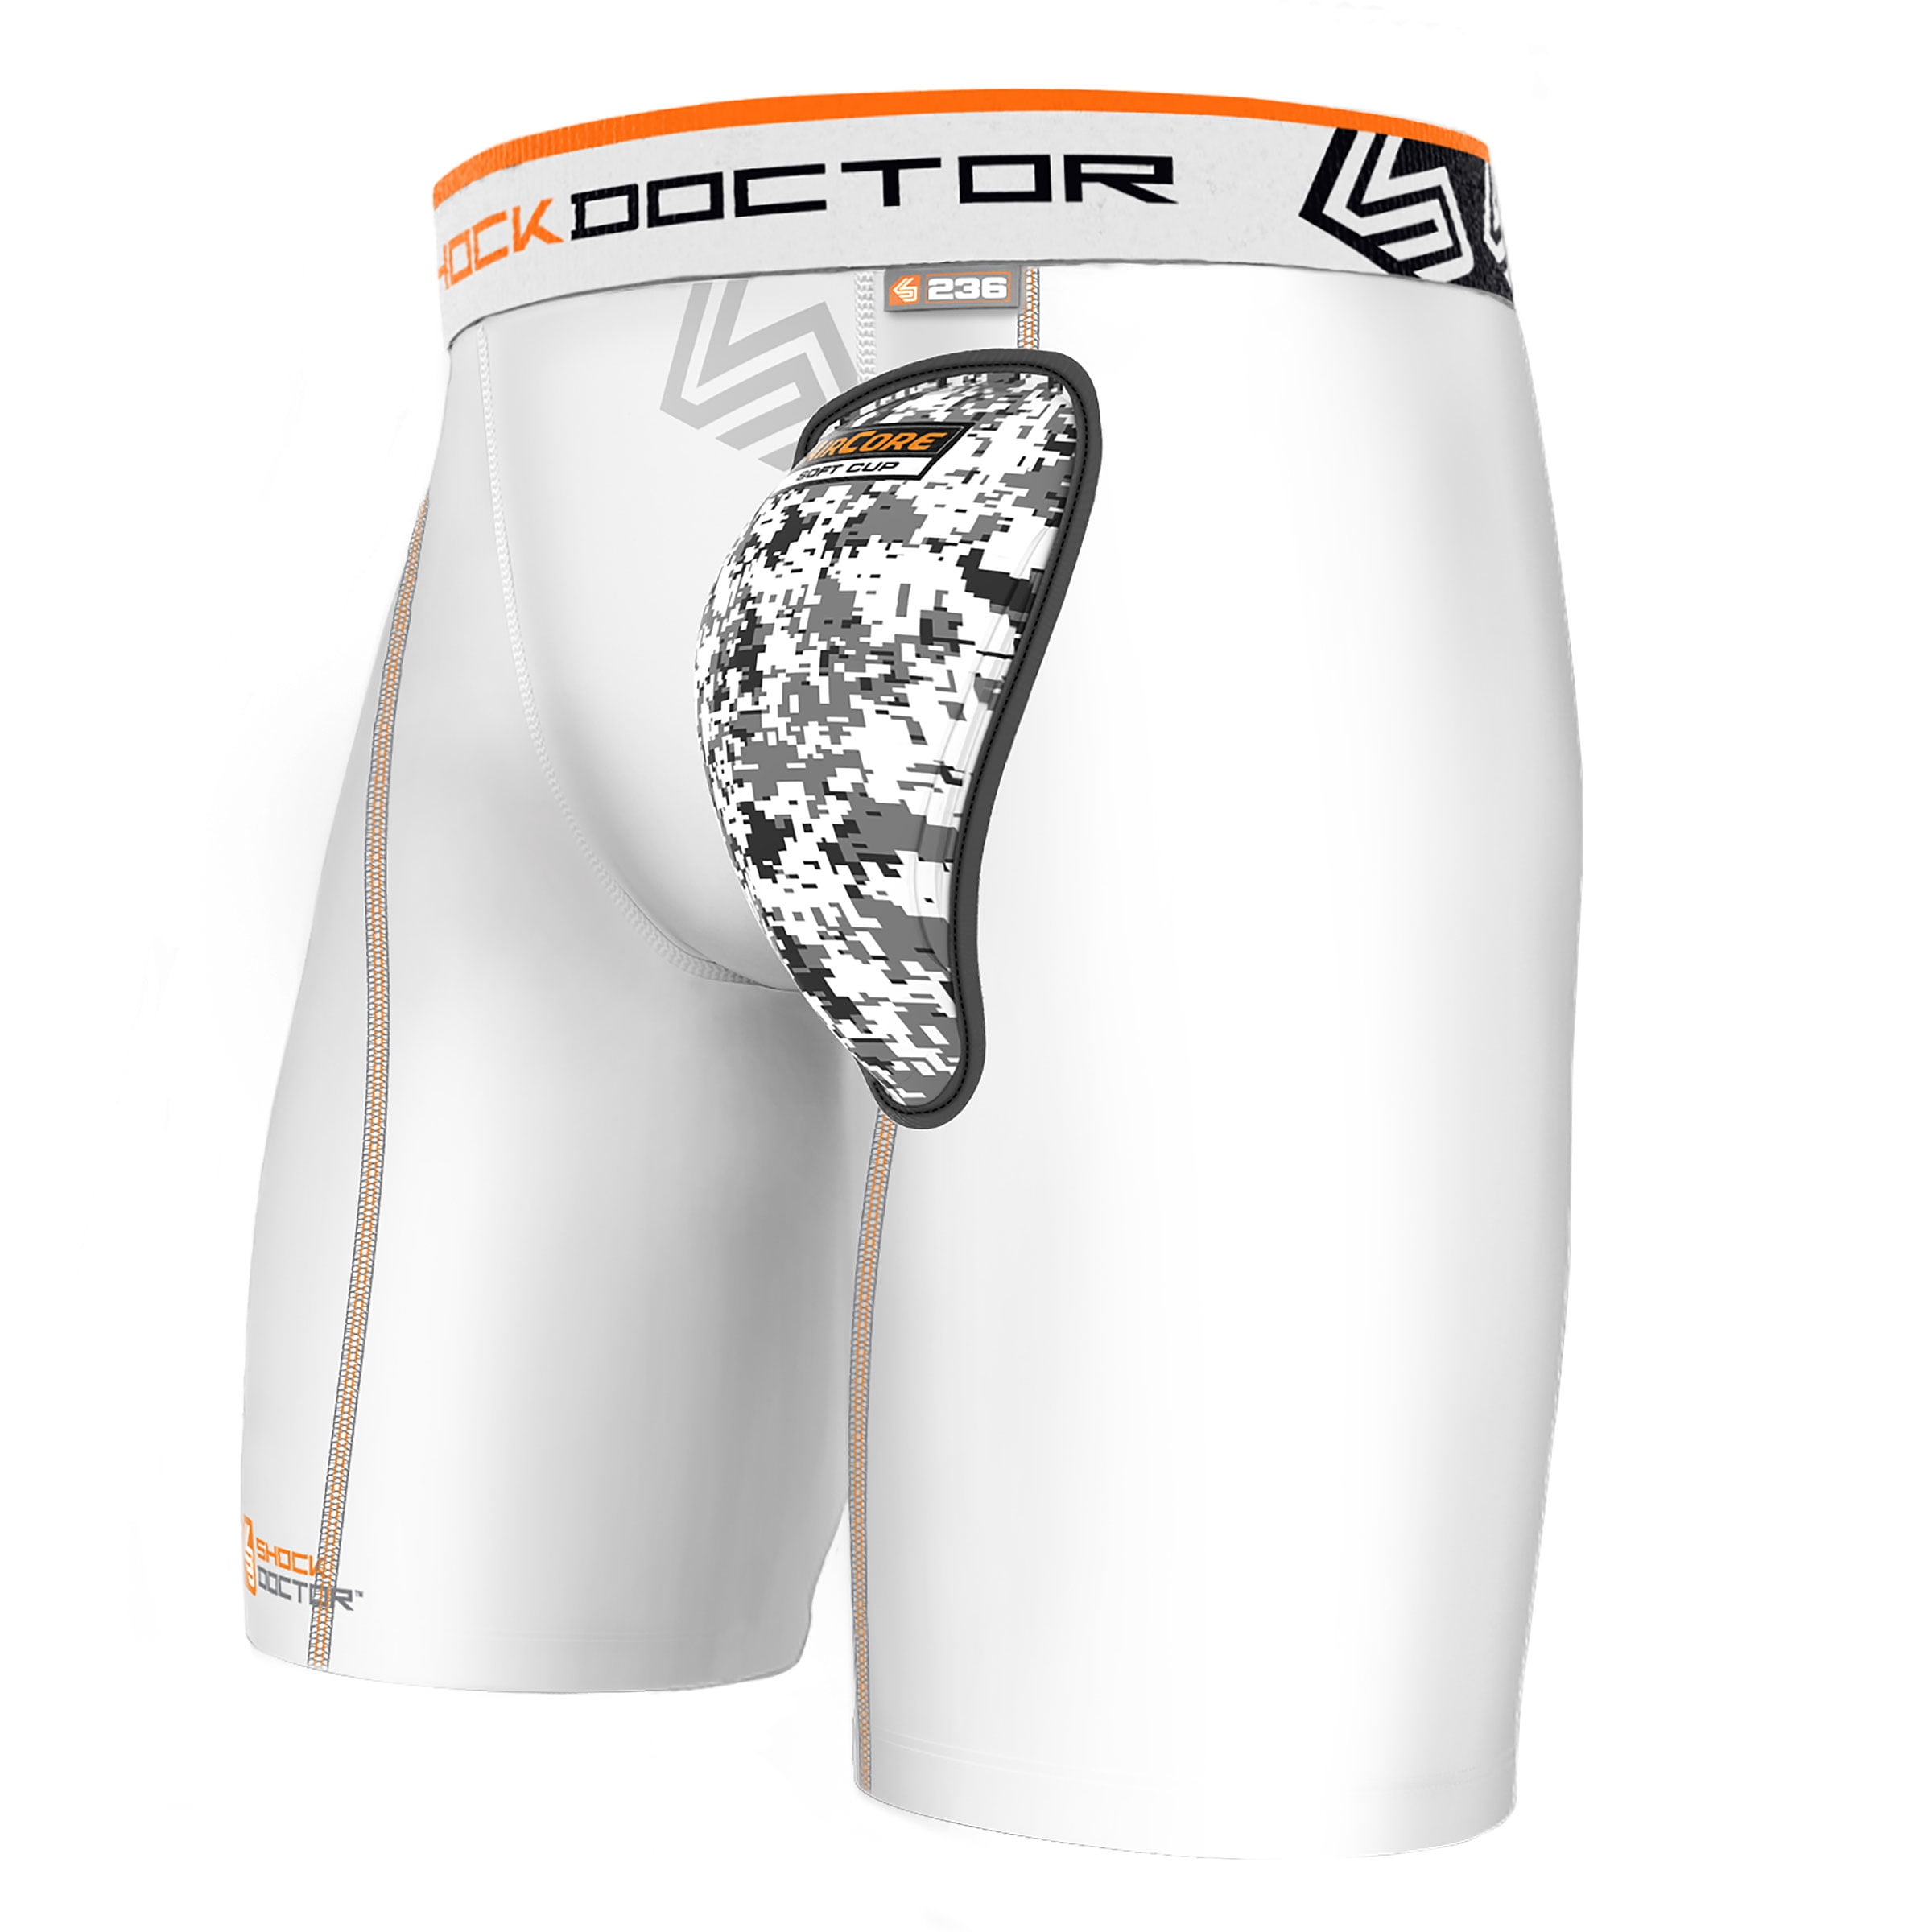 Shock Doctor AirCore Lightweight Protective Hard Cup small ** ages 9 and younger 